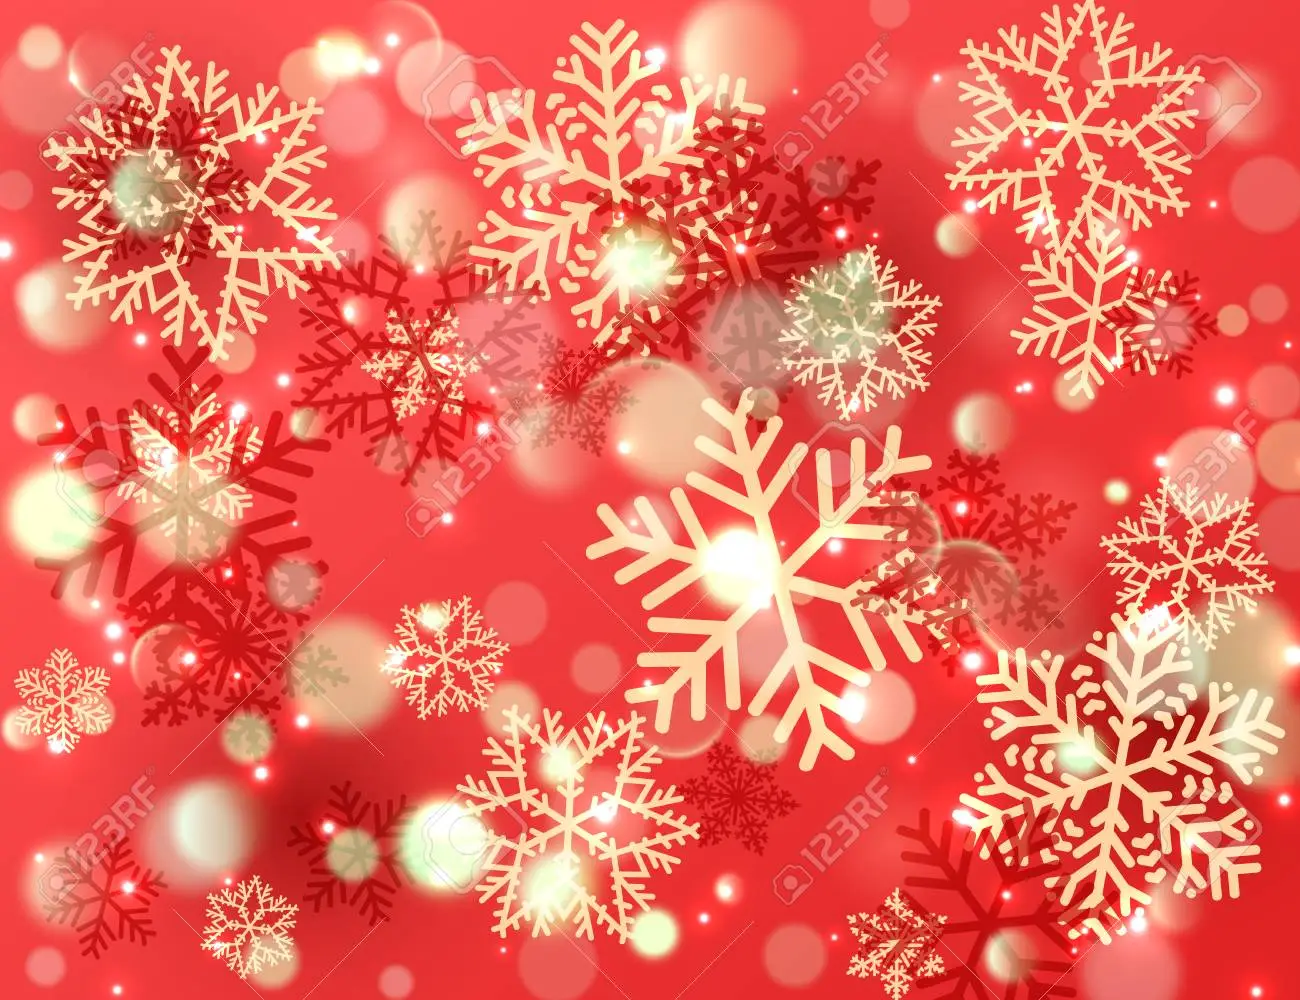 Christmas background with shining gold and red snowflakes winter vector illustration royalty free svg cliparts vectors and stock illustration image